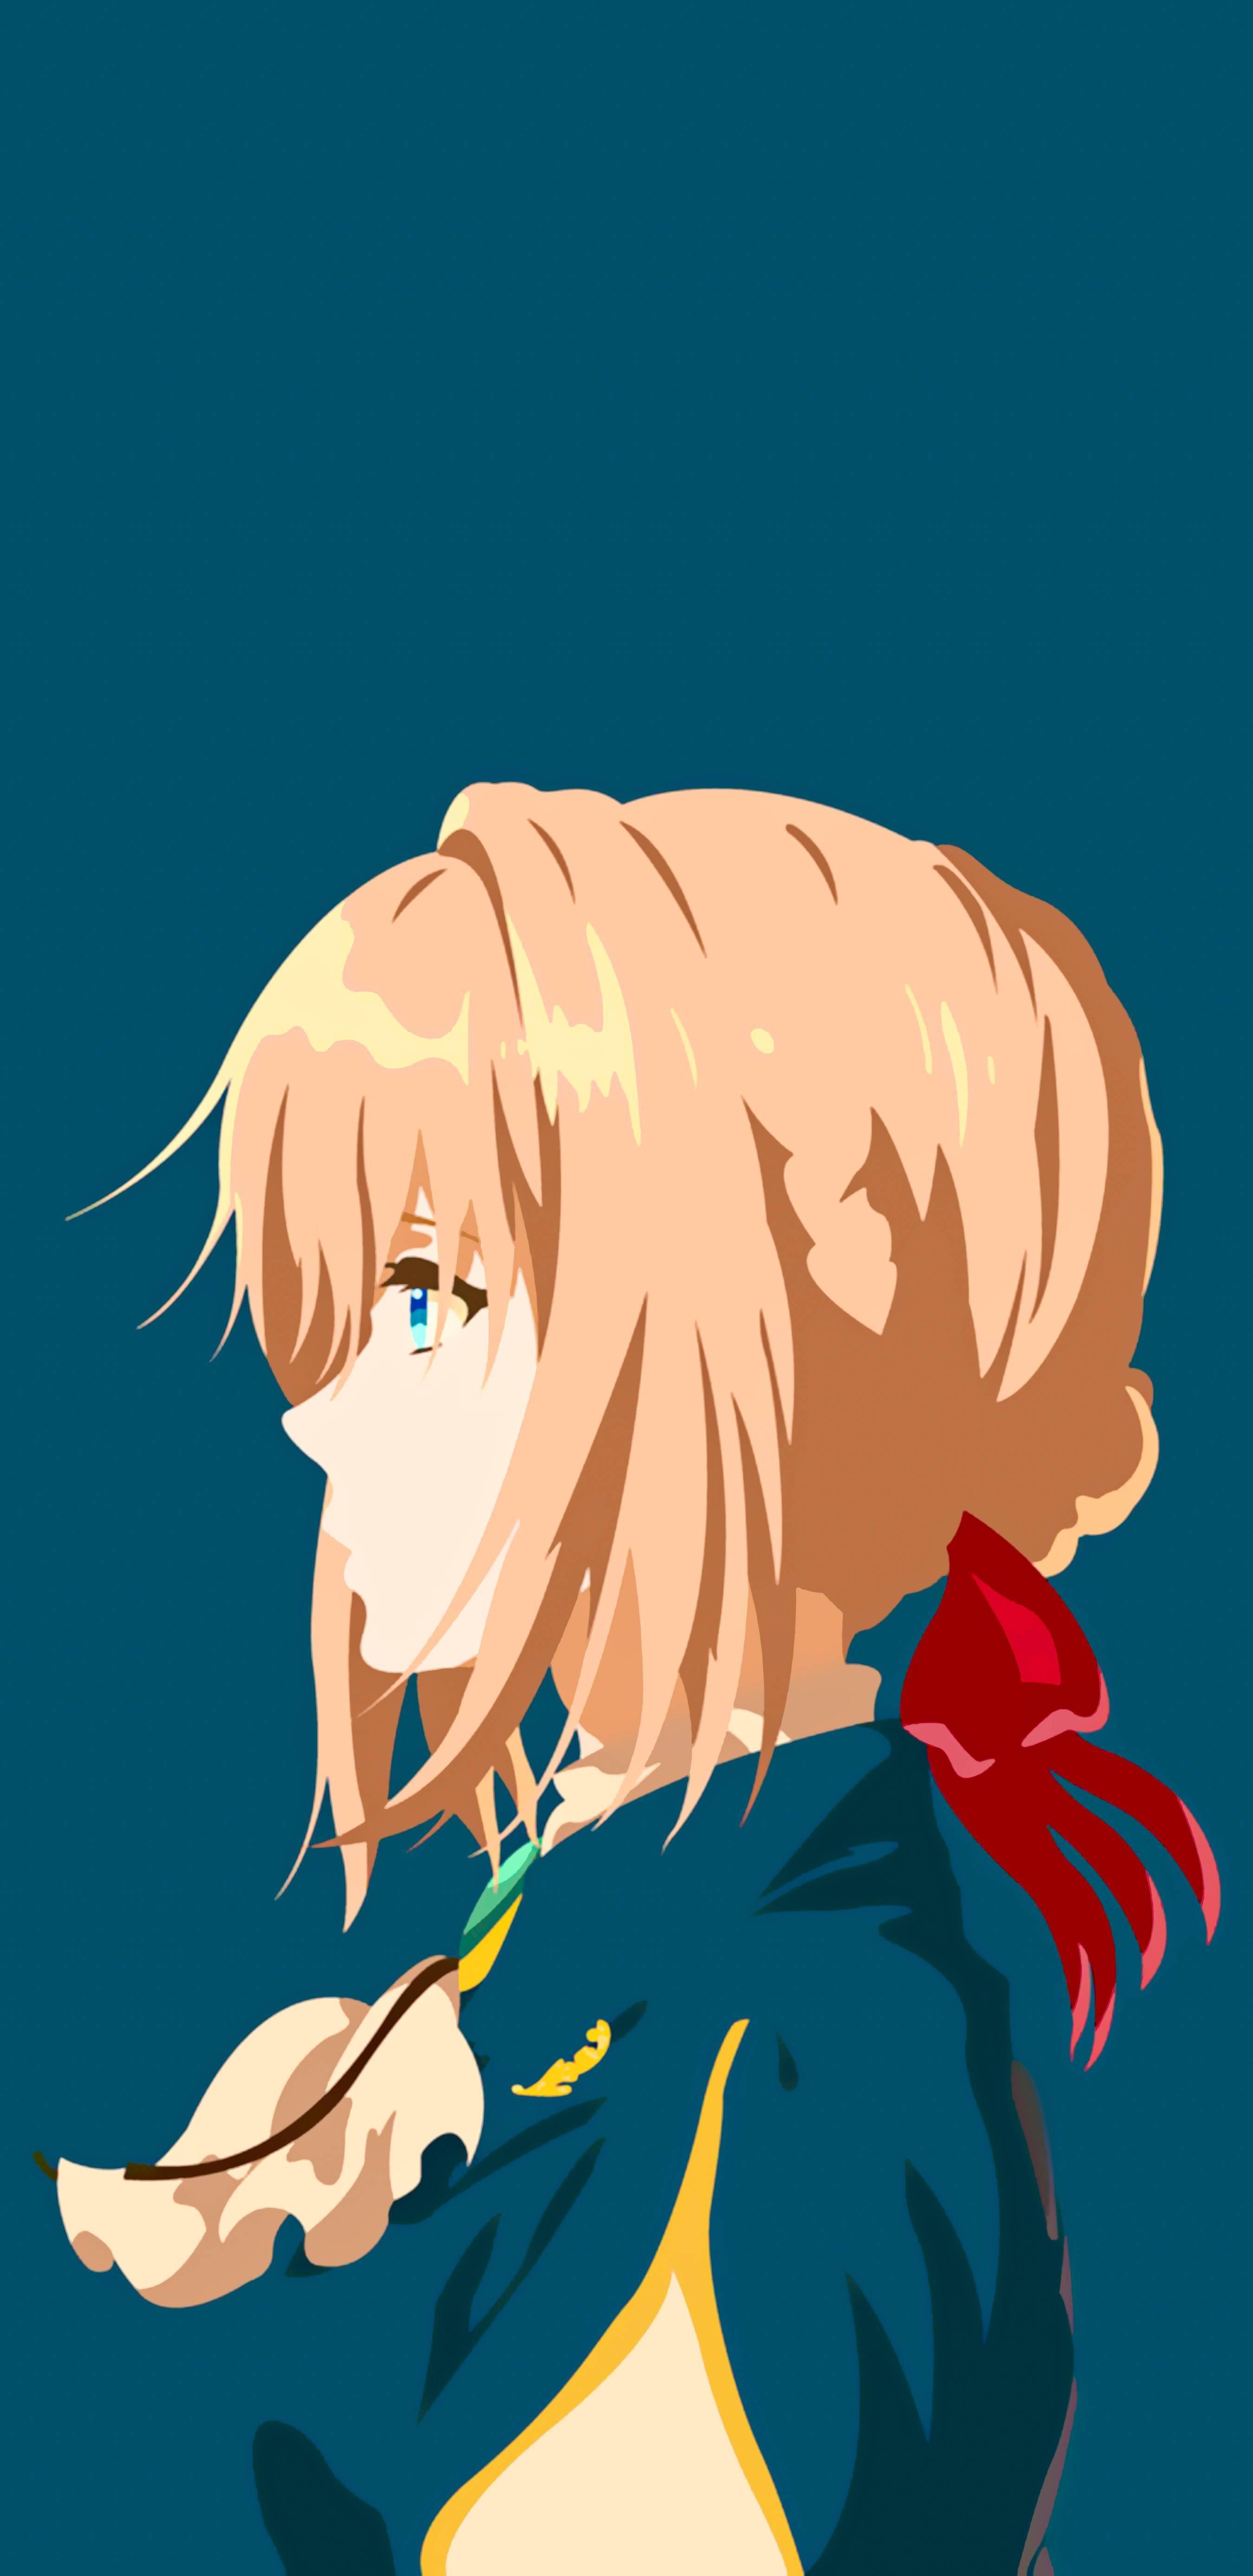 Request AMOLED Friendly wallpaper of this Violet Evergarden